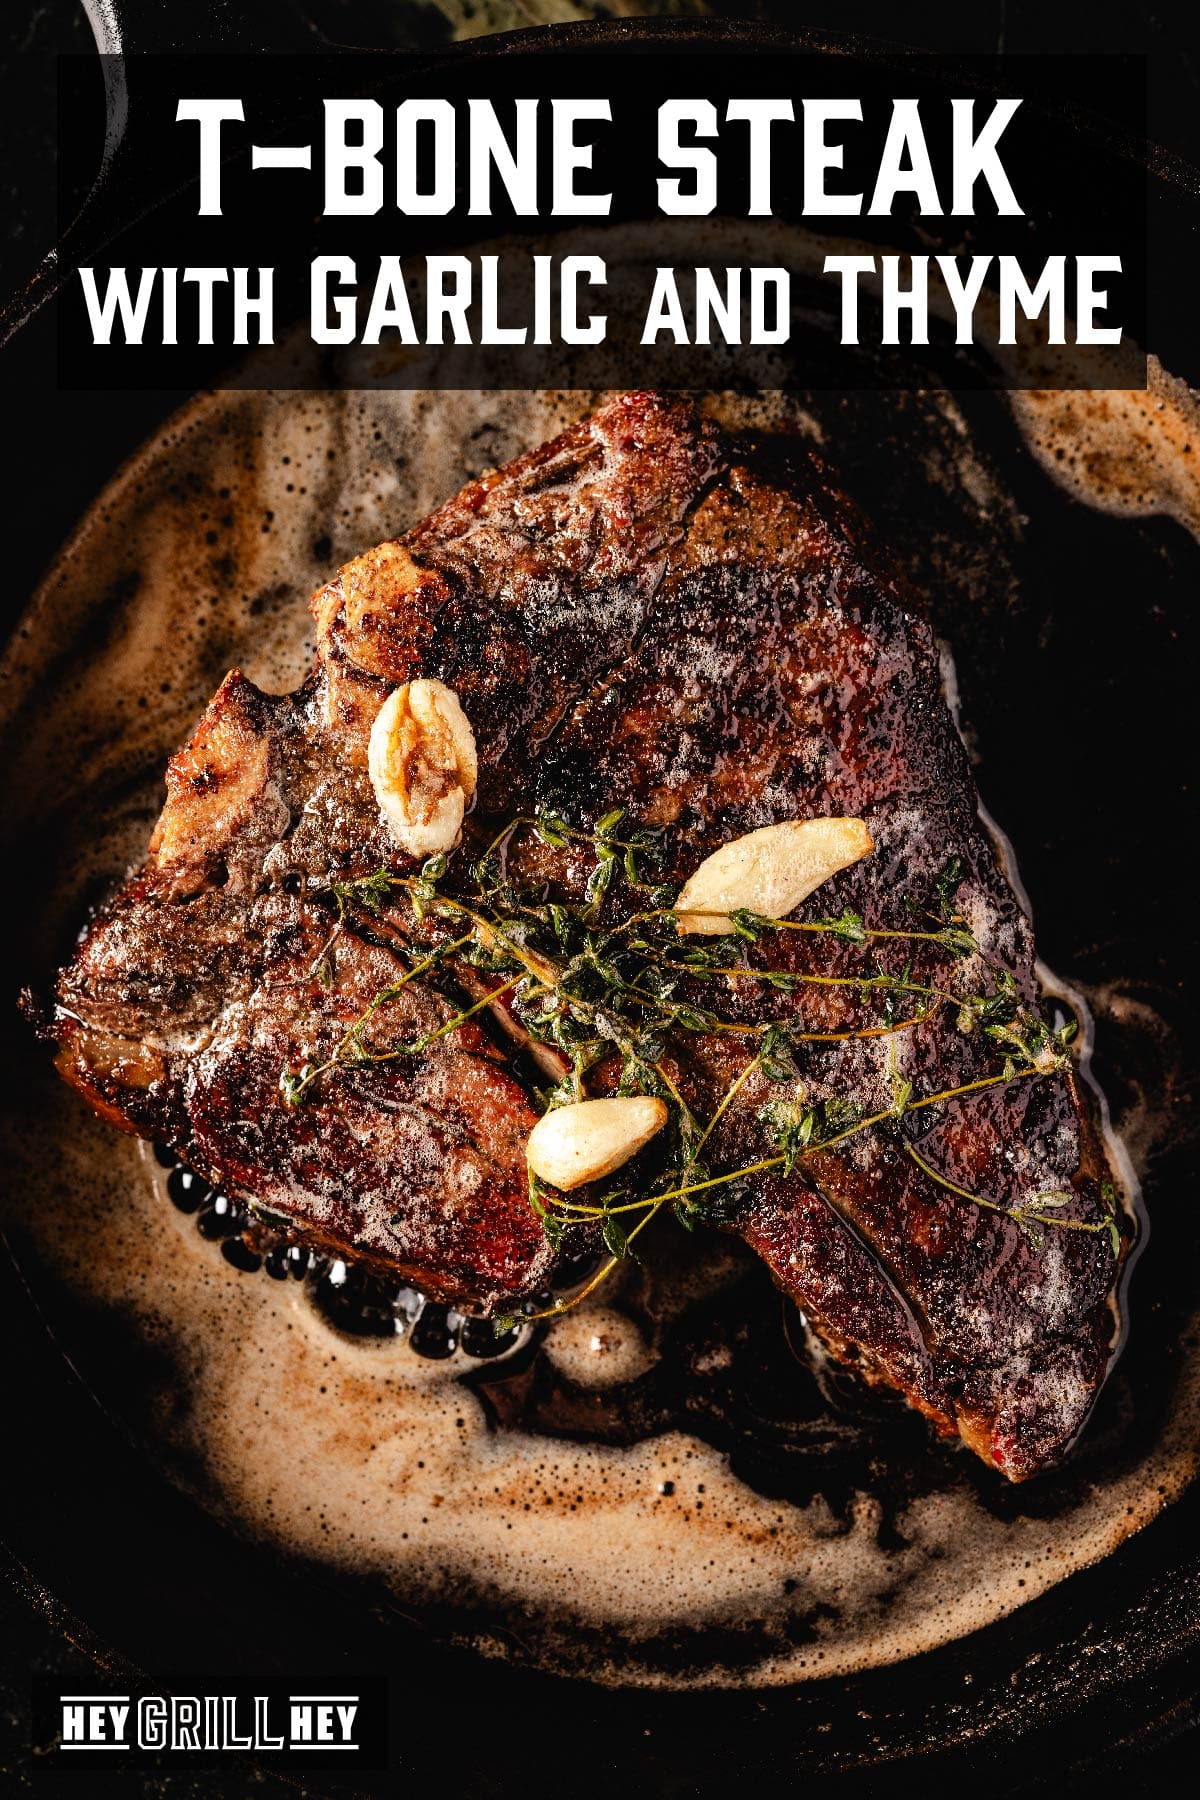 Steak on platter with garlic bulbs and thyme. Text reads "T-bone Steak with Garlic and Thyme".